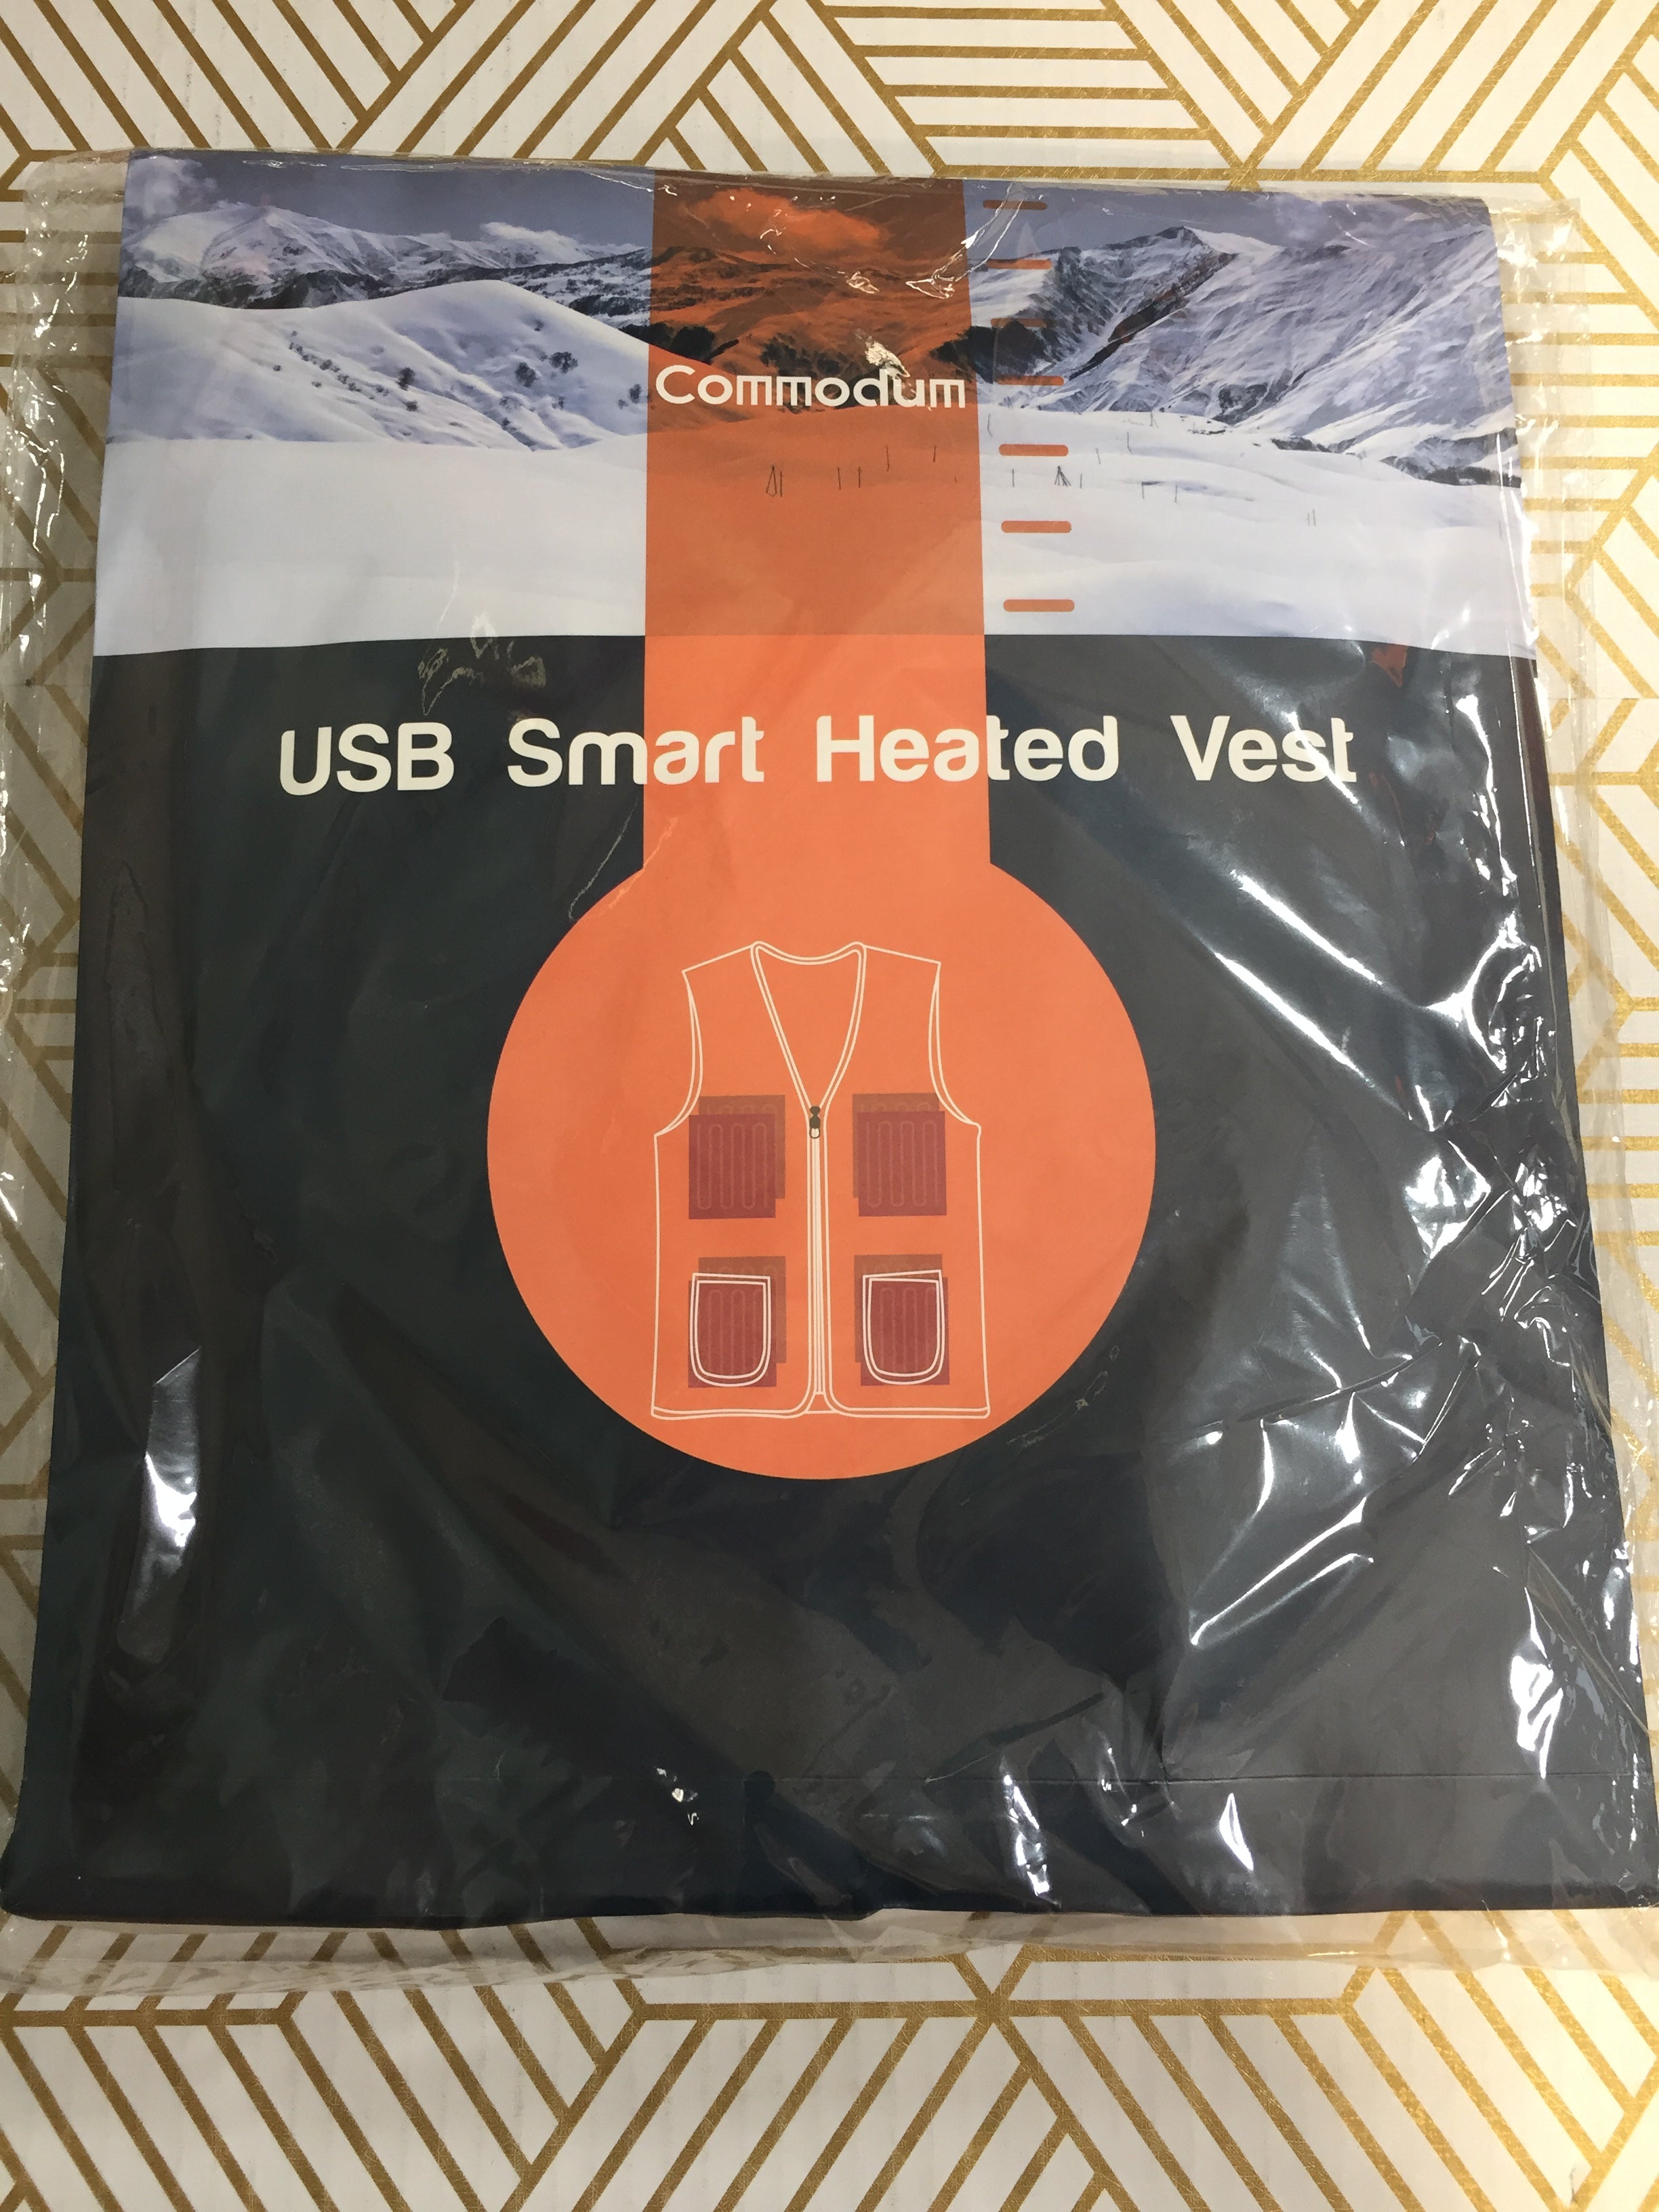 Commodum USB Smart Heated Unisex Vest XXL - Battery NOT Included (7734530670830)